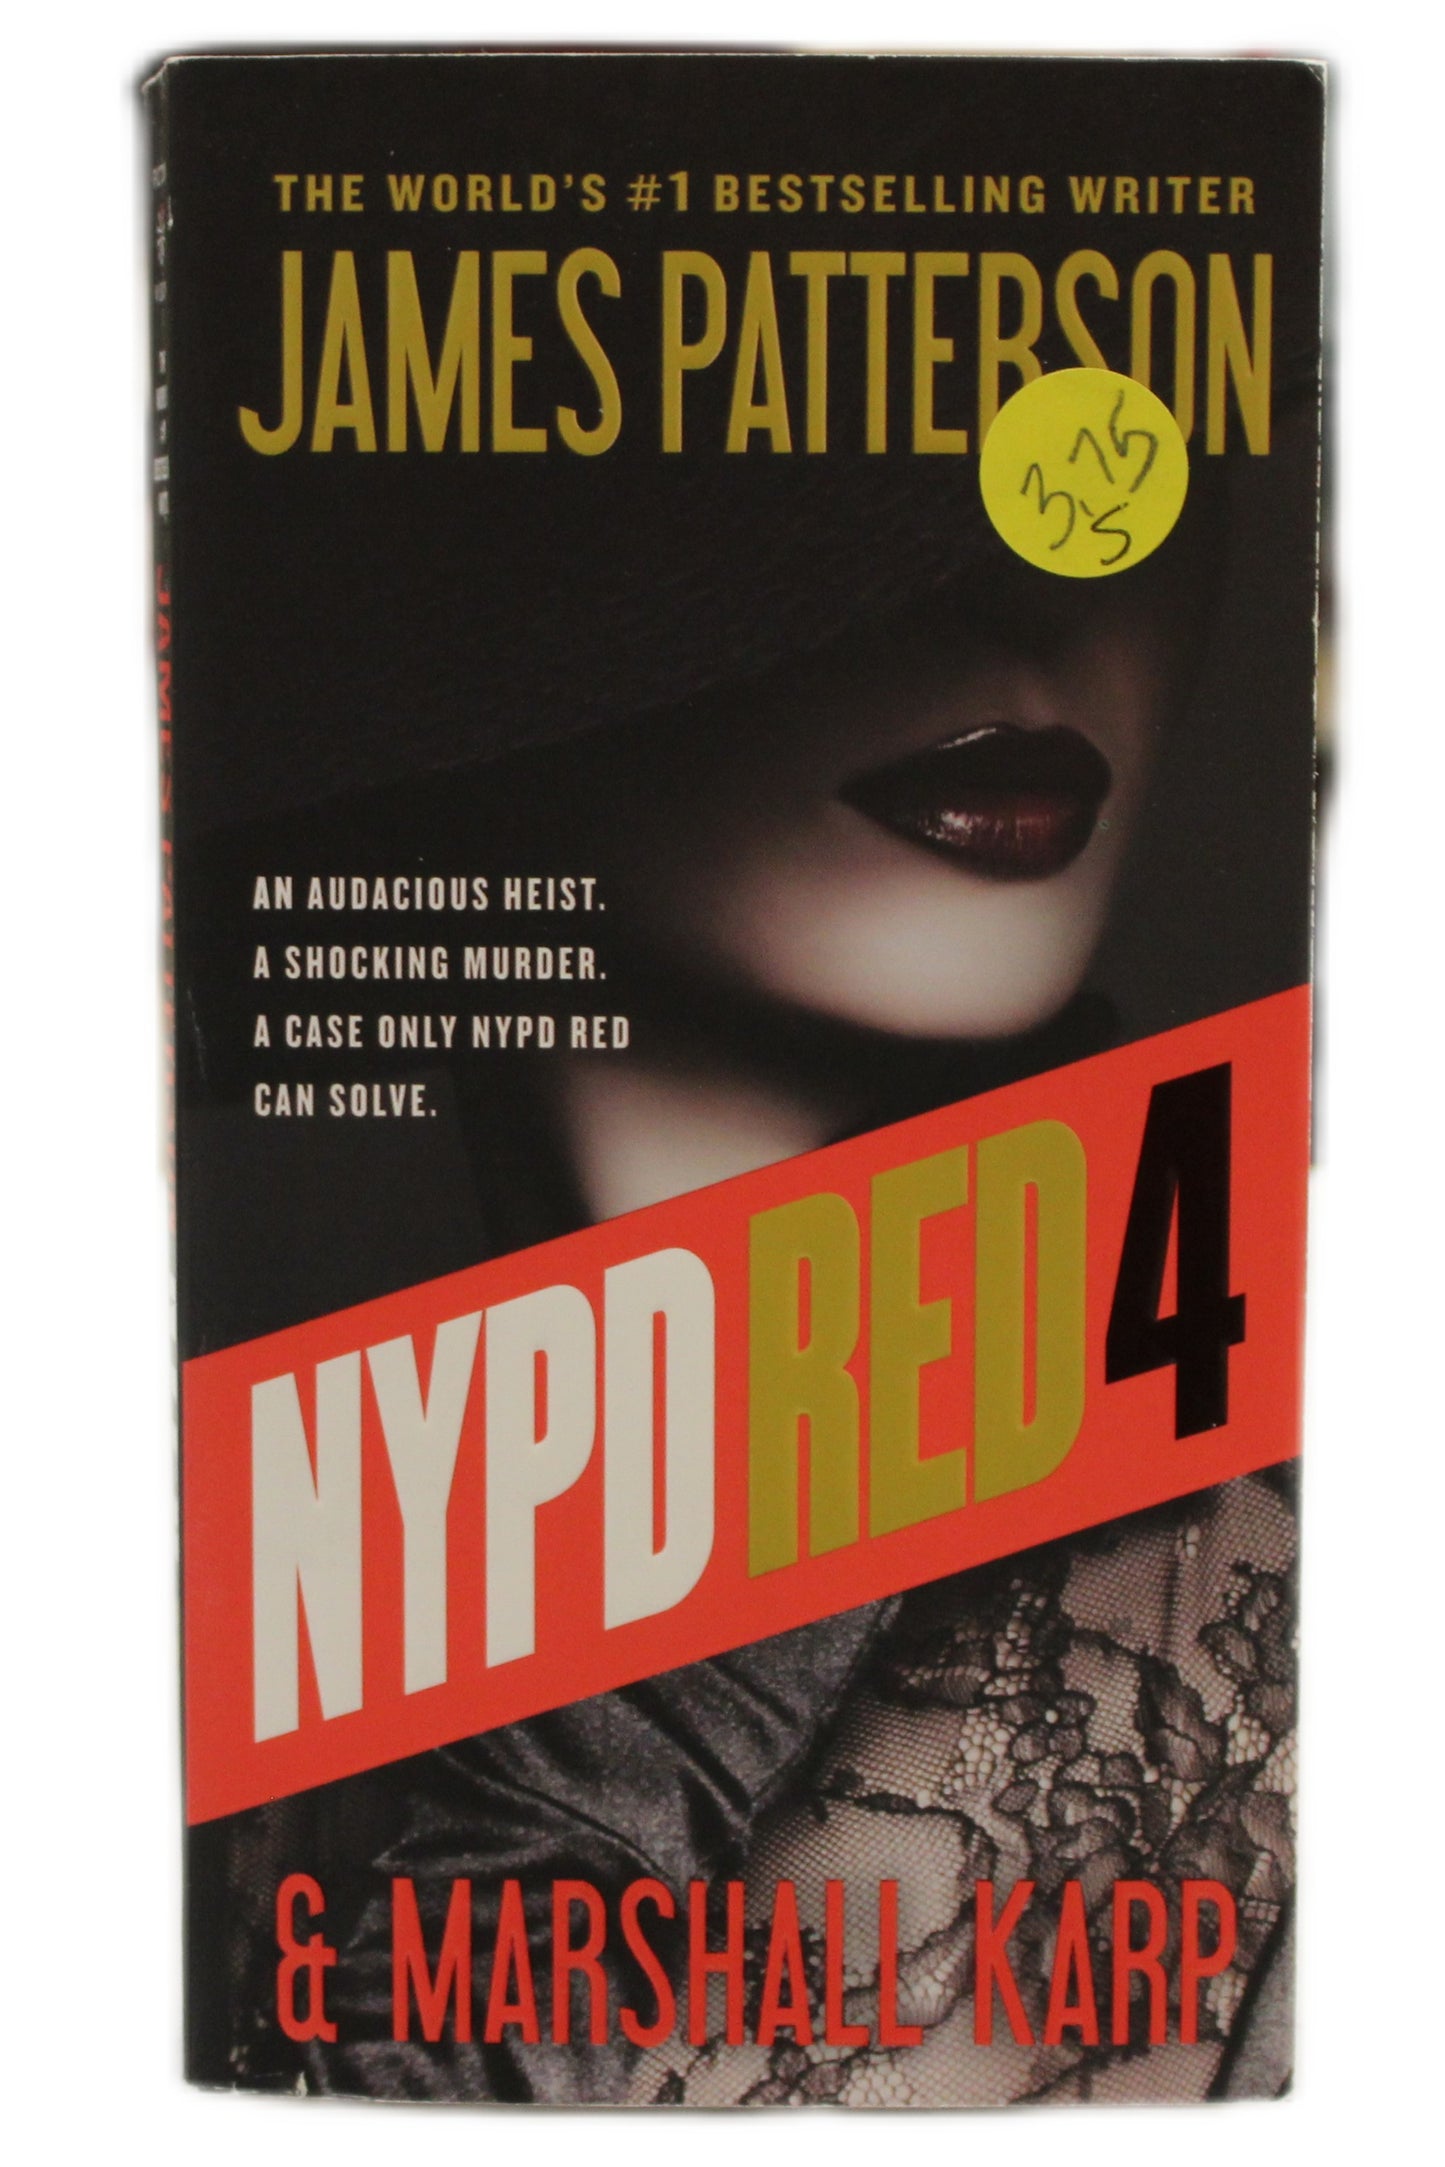 NYPD RED 4